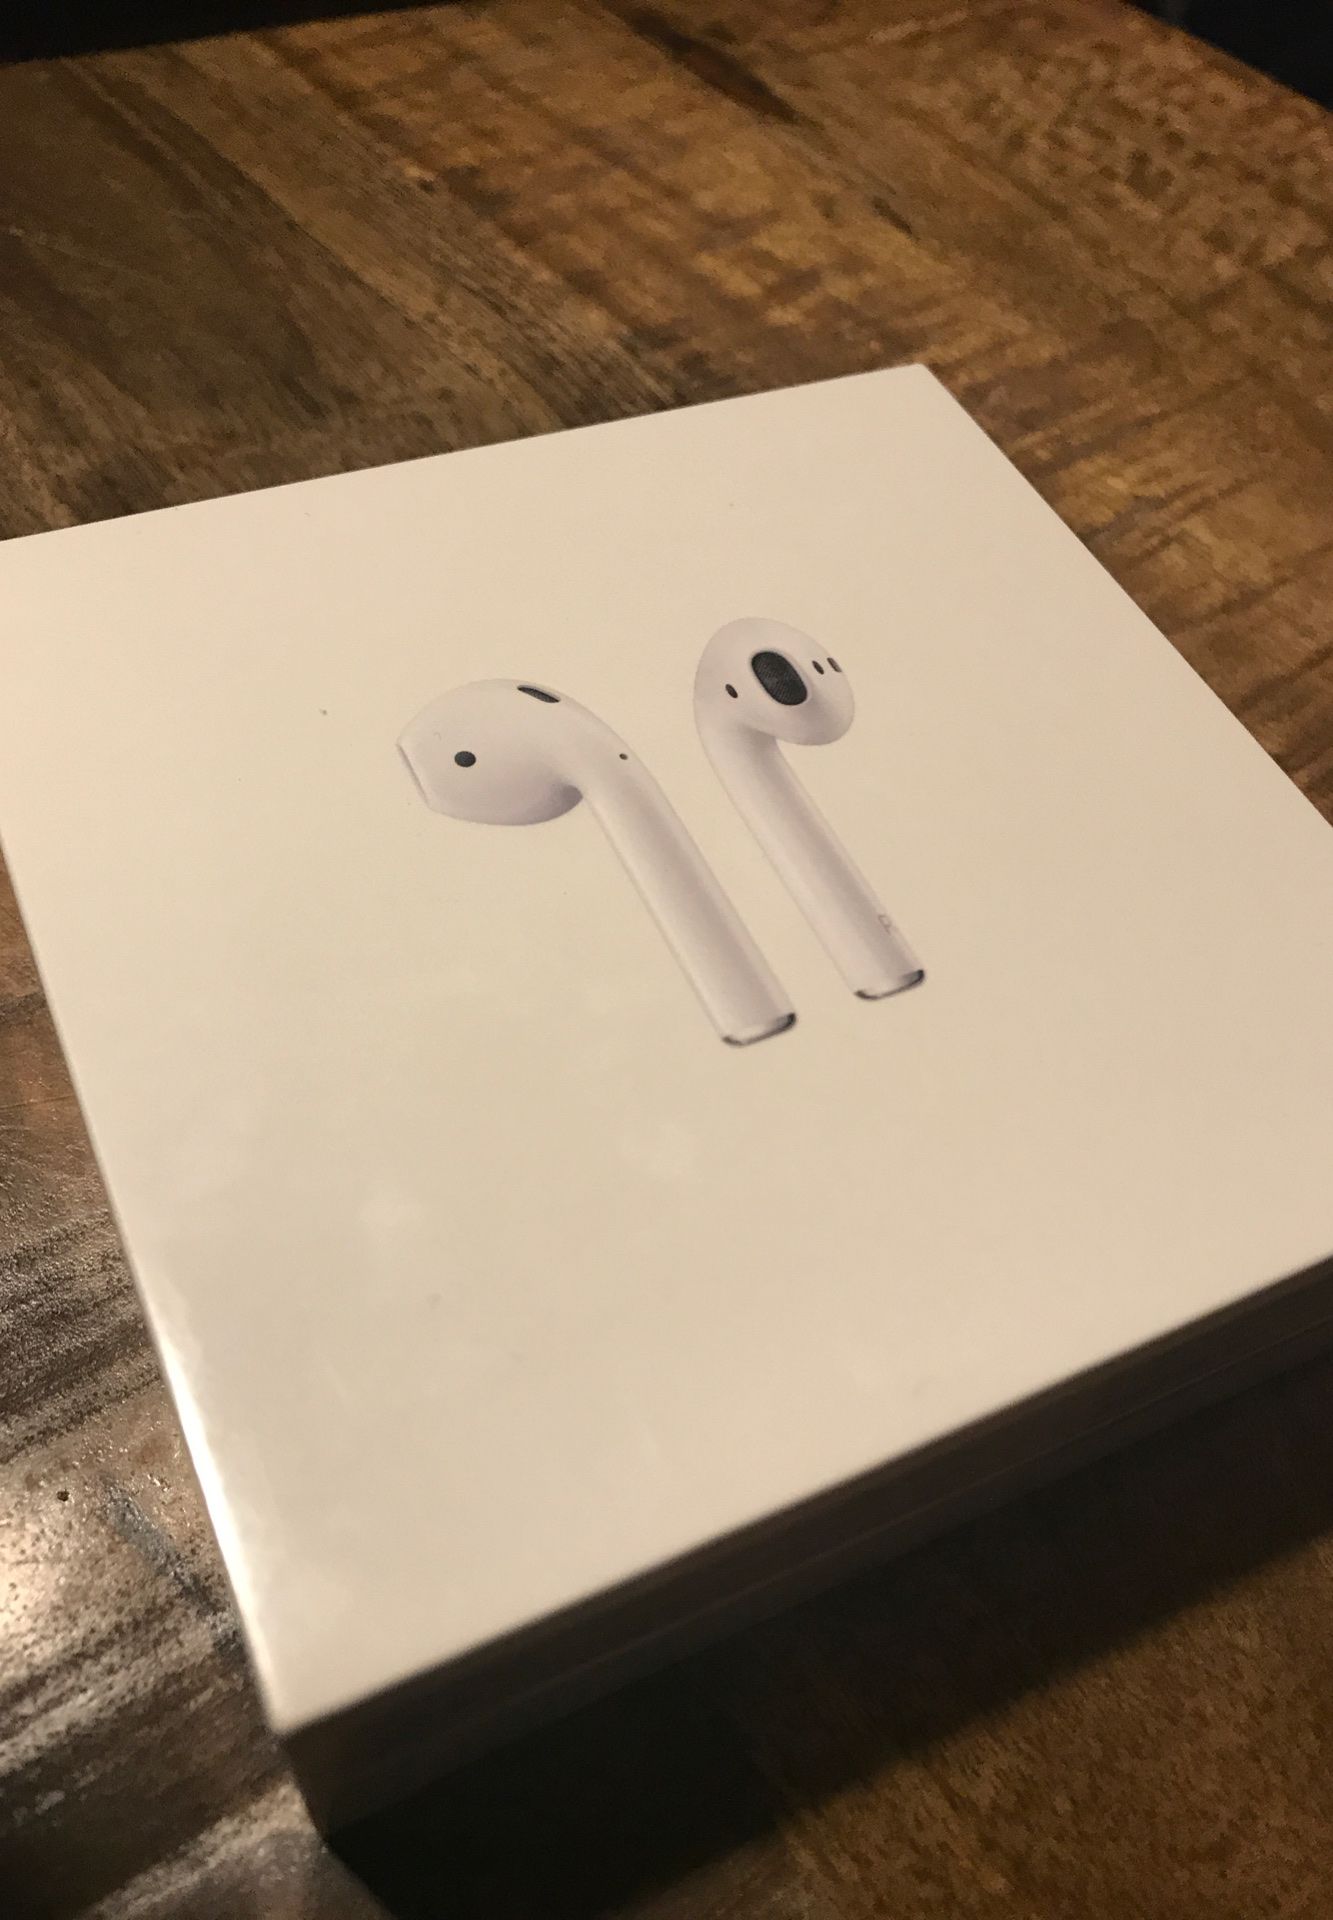 Apple AirPods w/charging case (latest model)